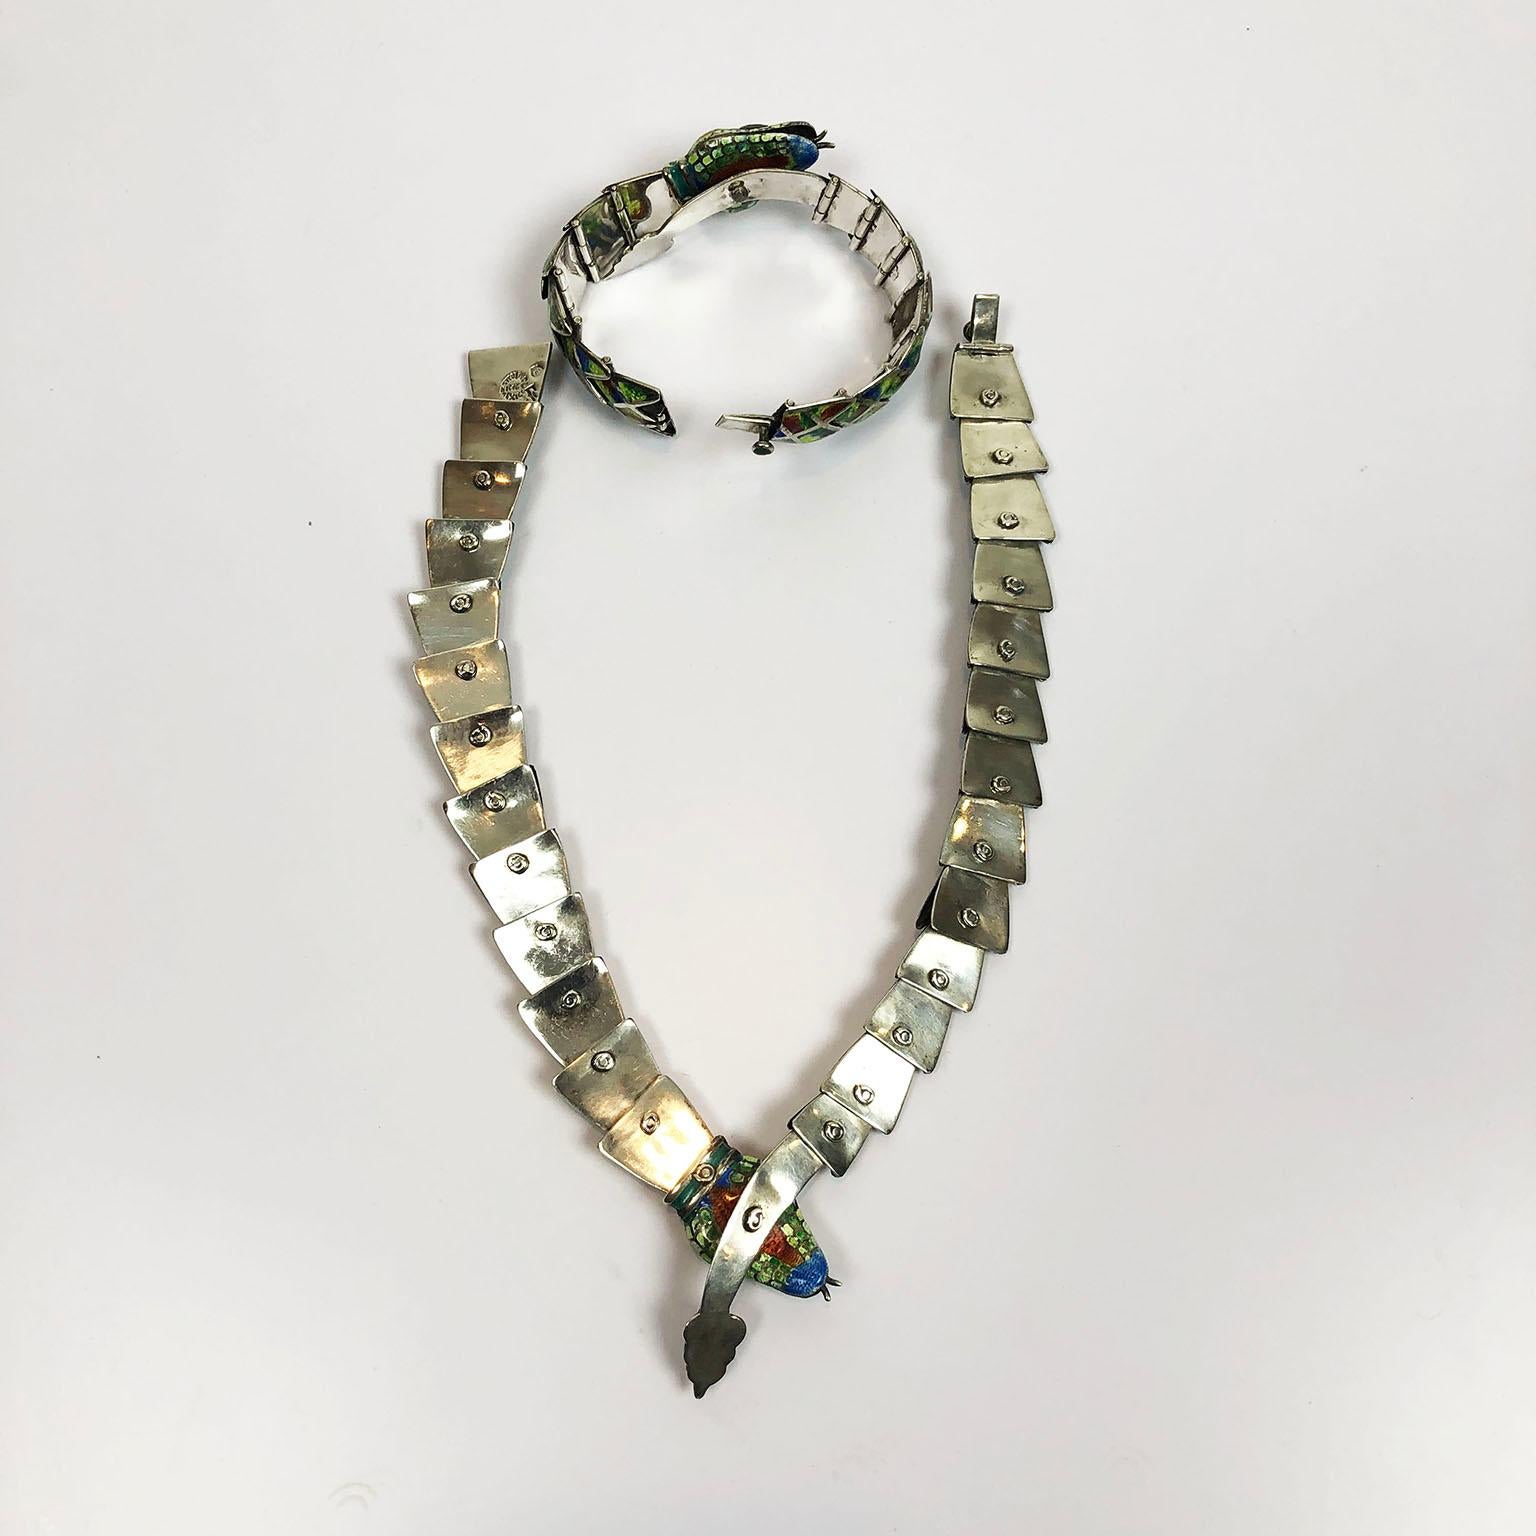 Reticulated Silver and Enamel Serpent Necklace and Bracelet by Jerónimo Fuentes 1